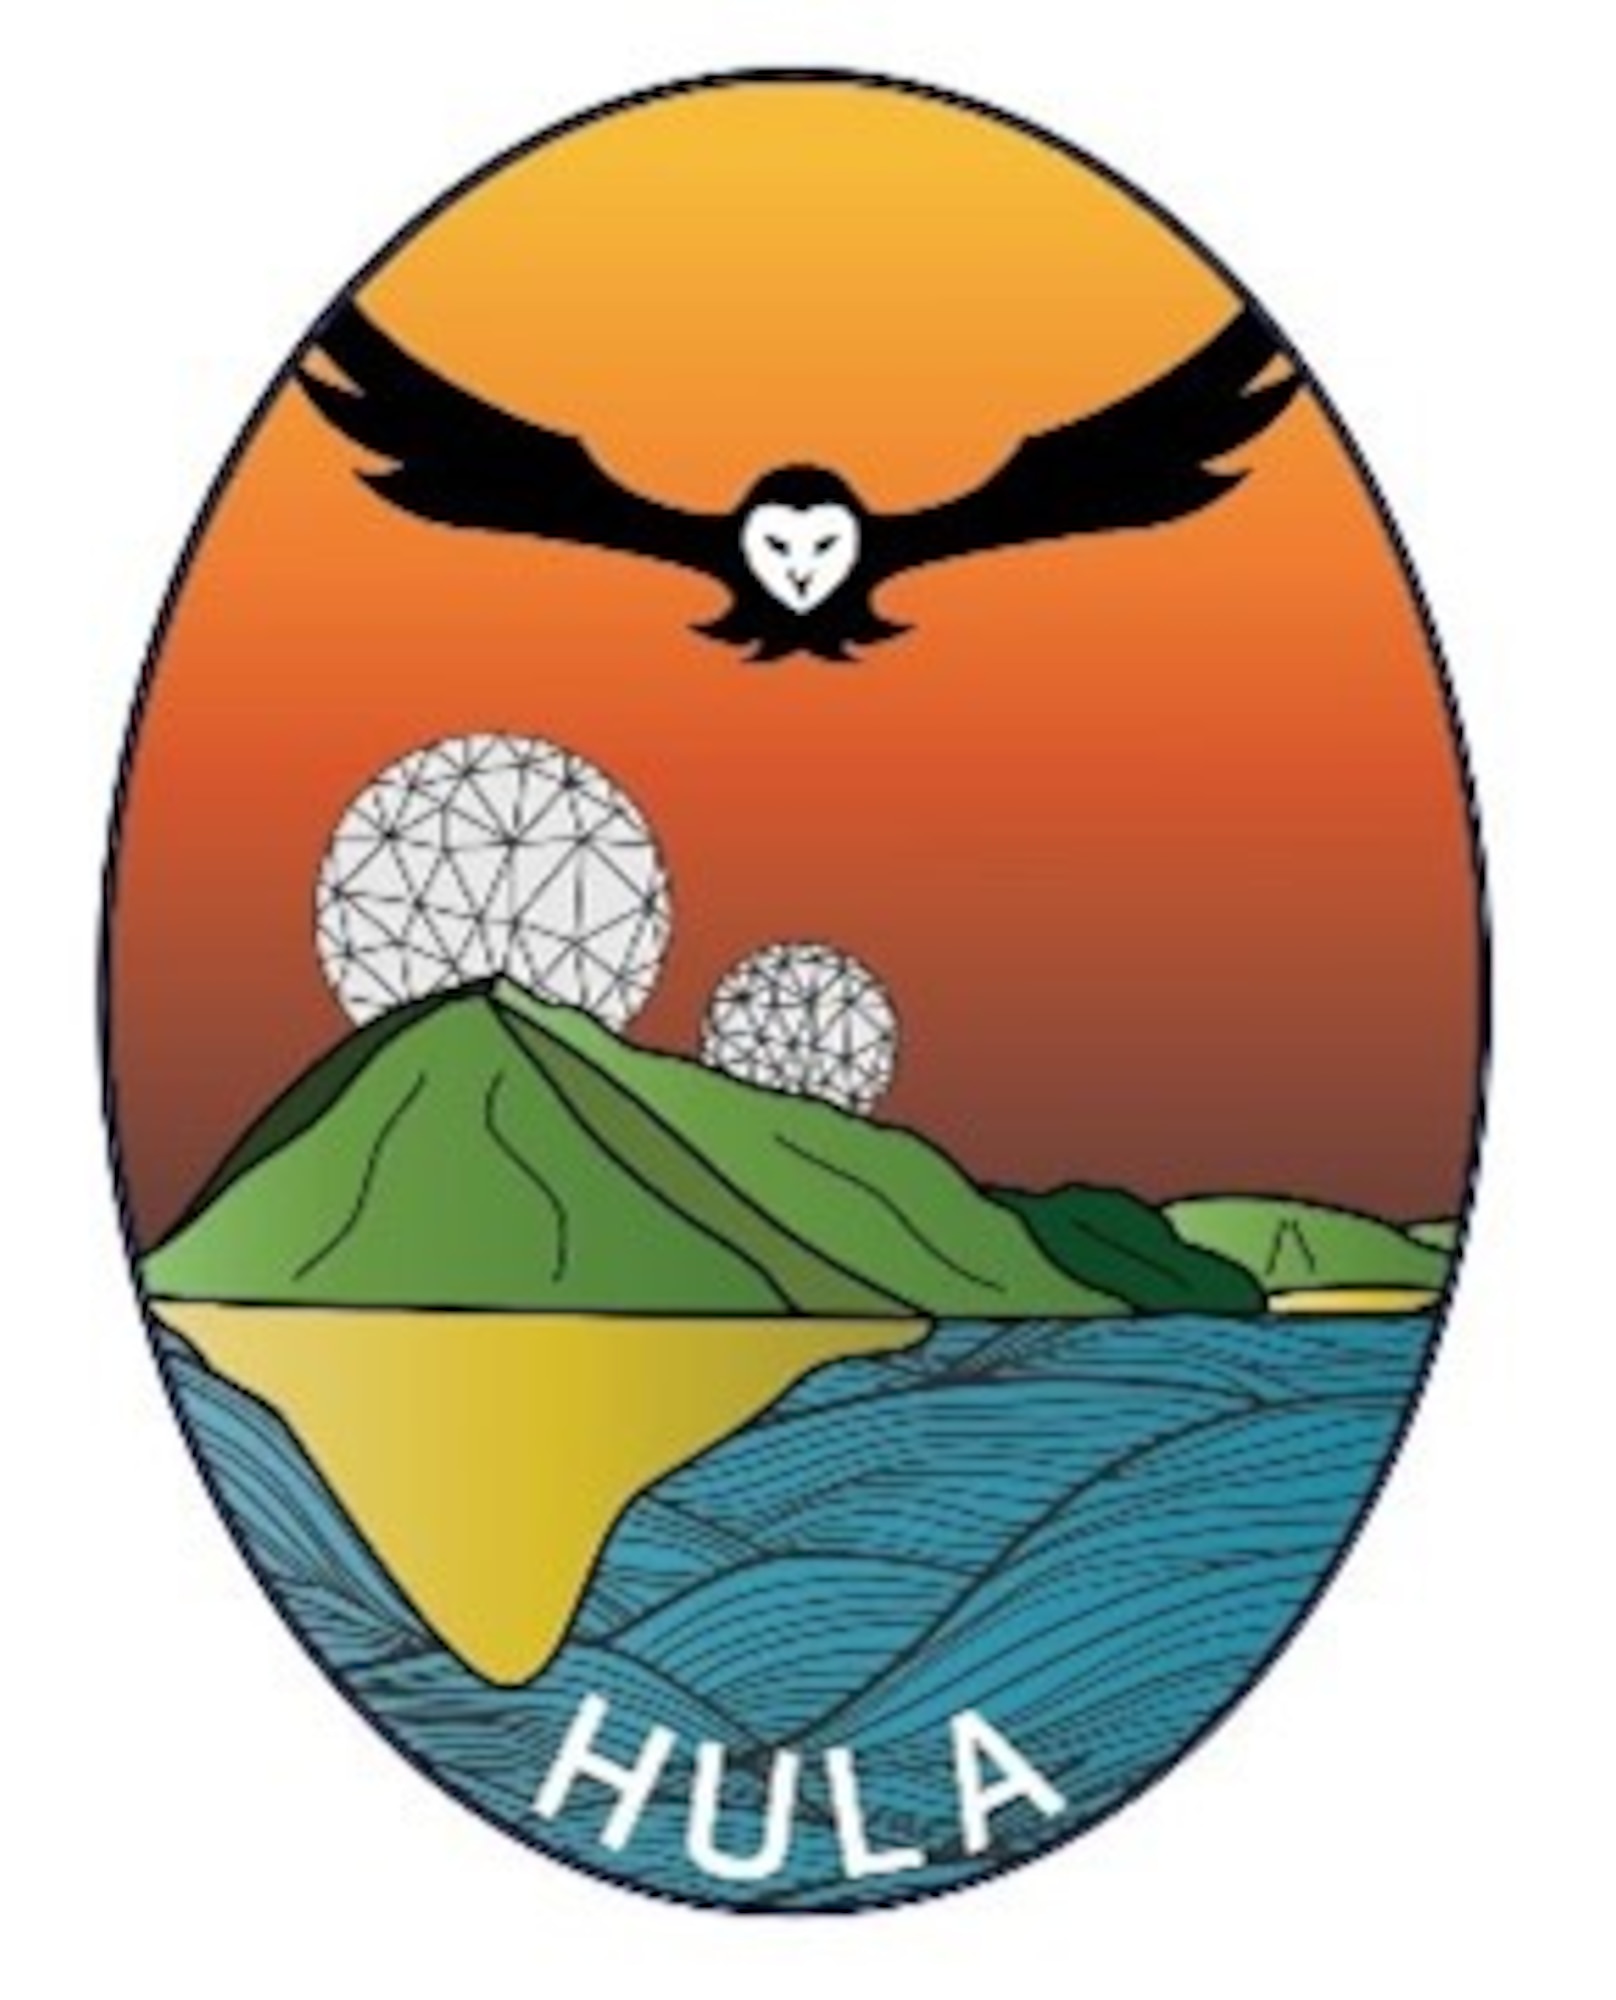 logo of artistic island landscape of Hawaii with an owl flying overhead and radomes atop the mountains and the word "HULA" at the bottom.